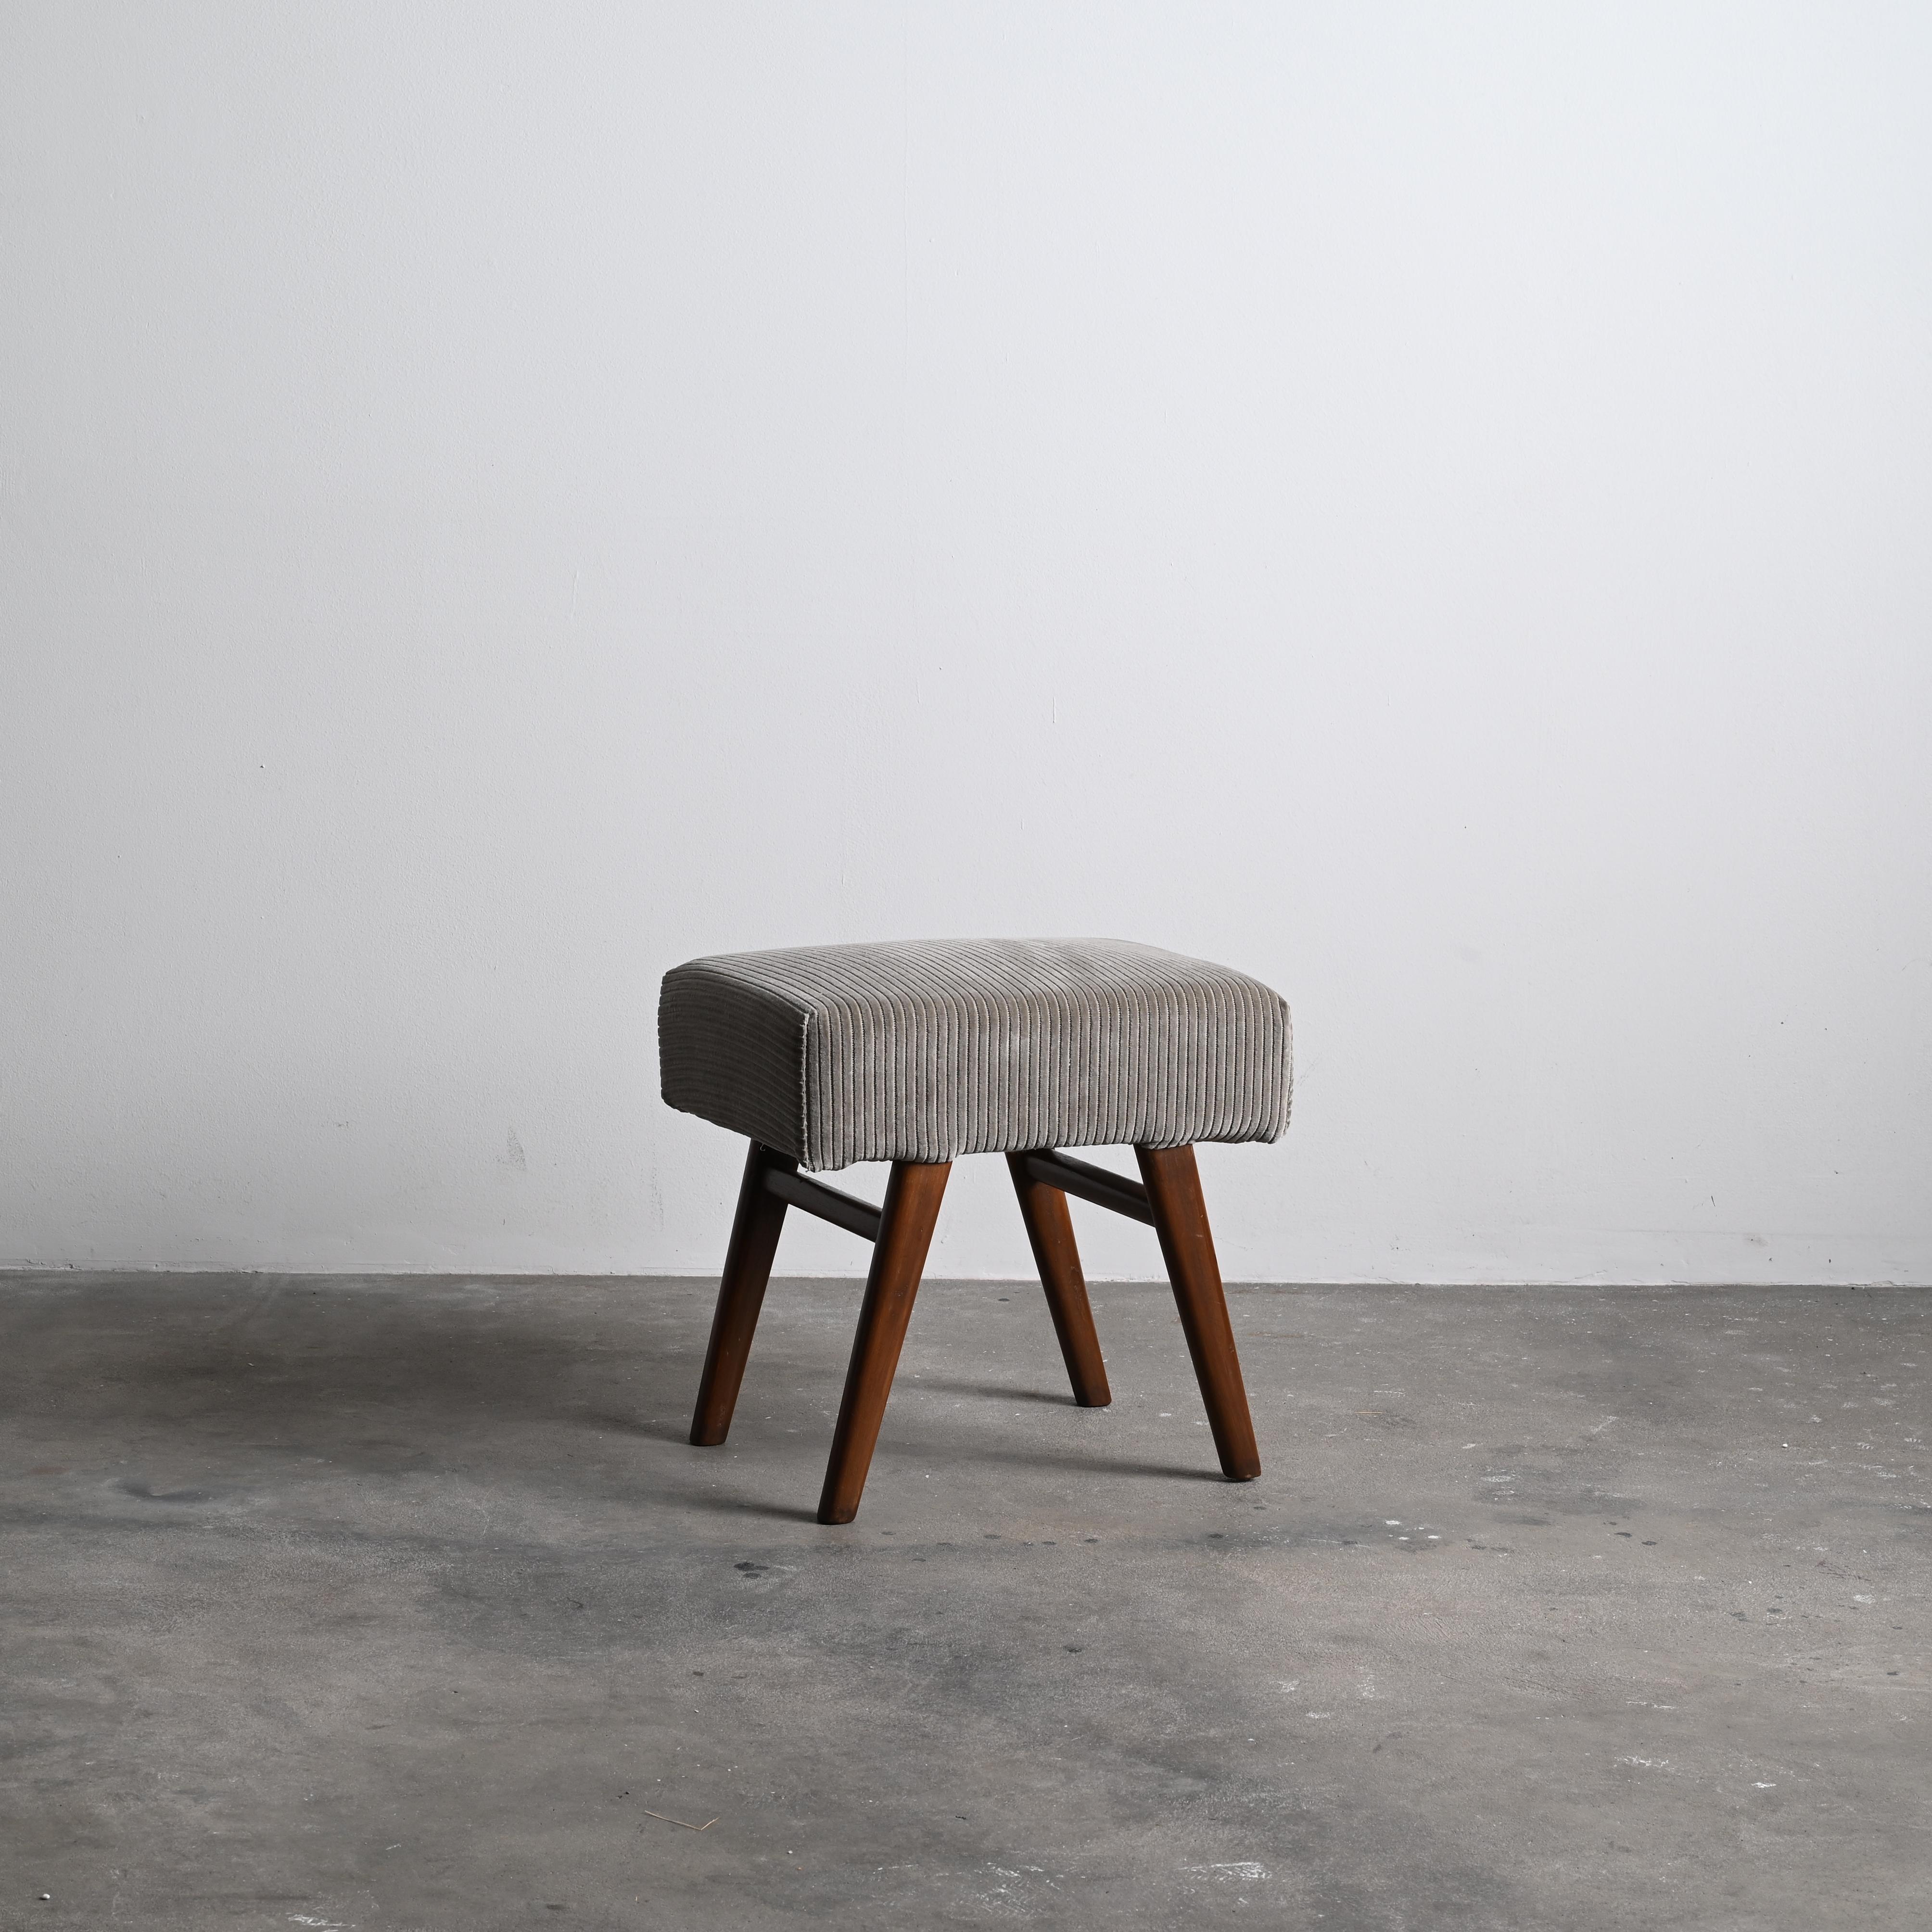 This rectangular low stool is an adorable piece of modernist furniture. It is raw in its simplicity, nothing too much but still nothing is missing. 
Upholstery is redone, but on the request can be changed in accordance with your preferences.